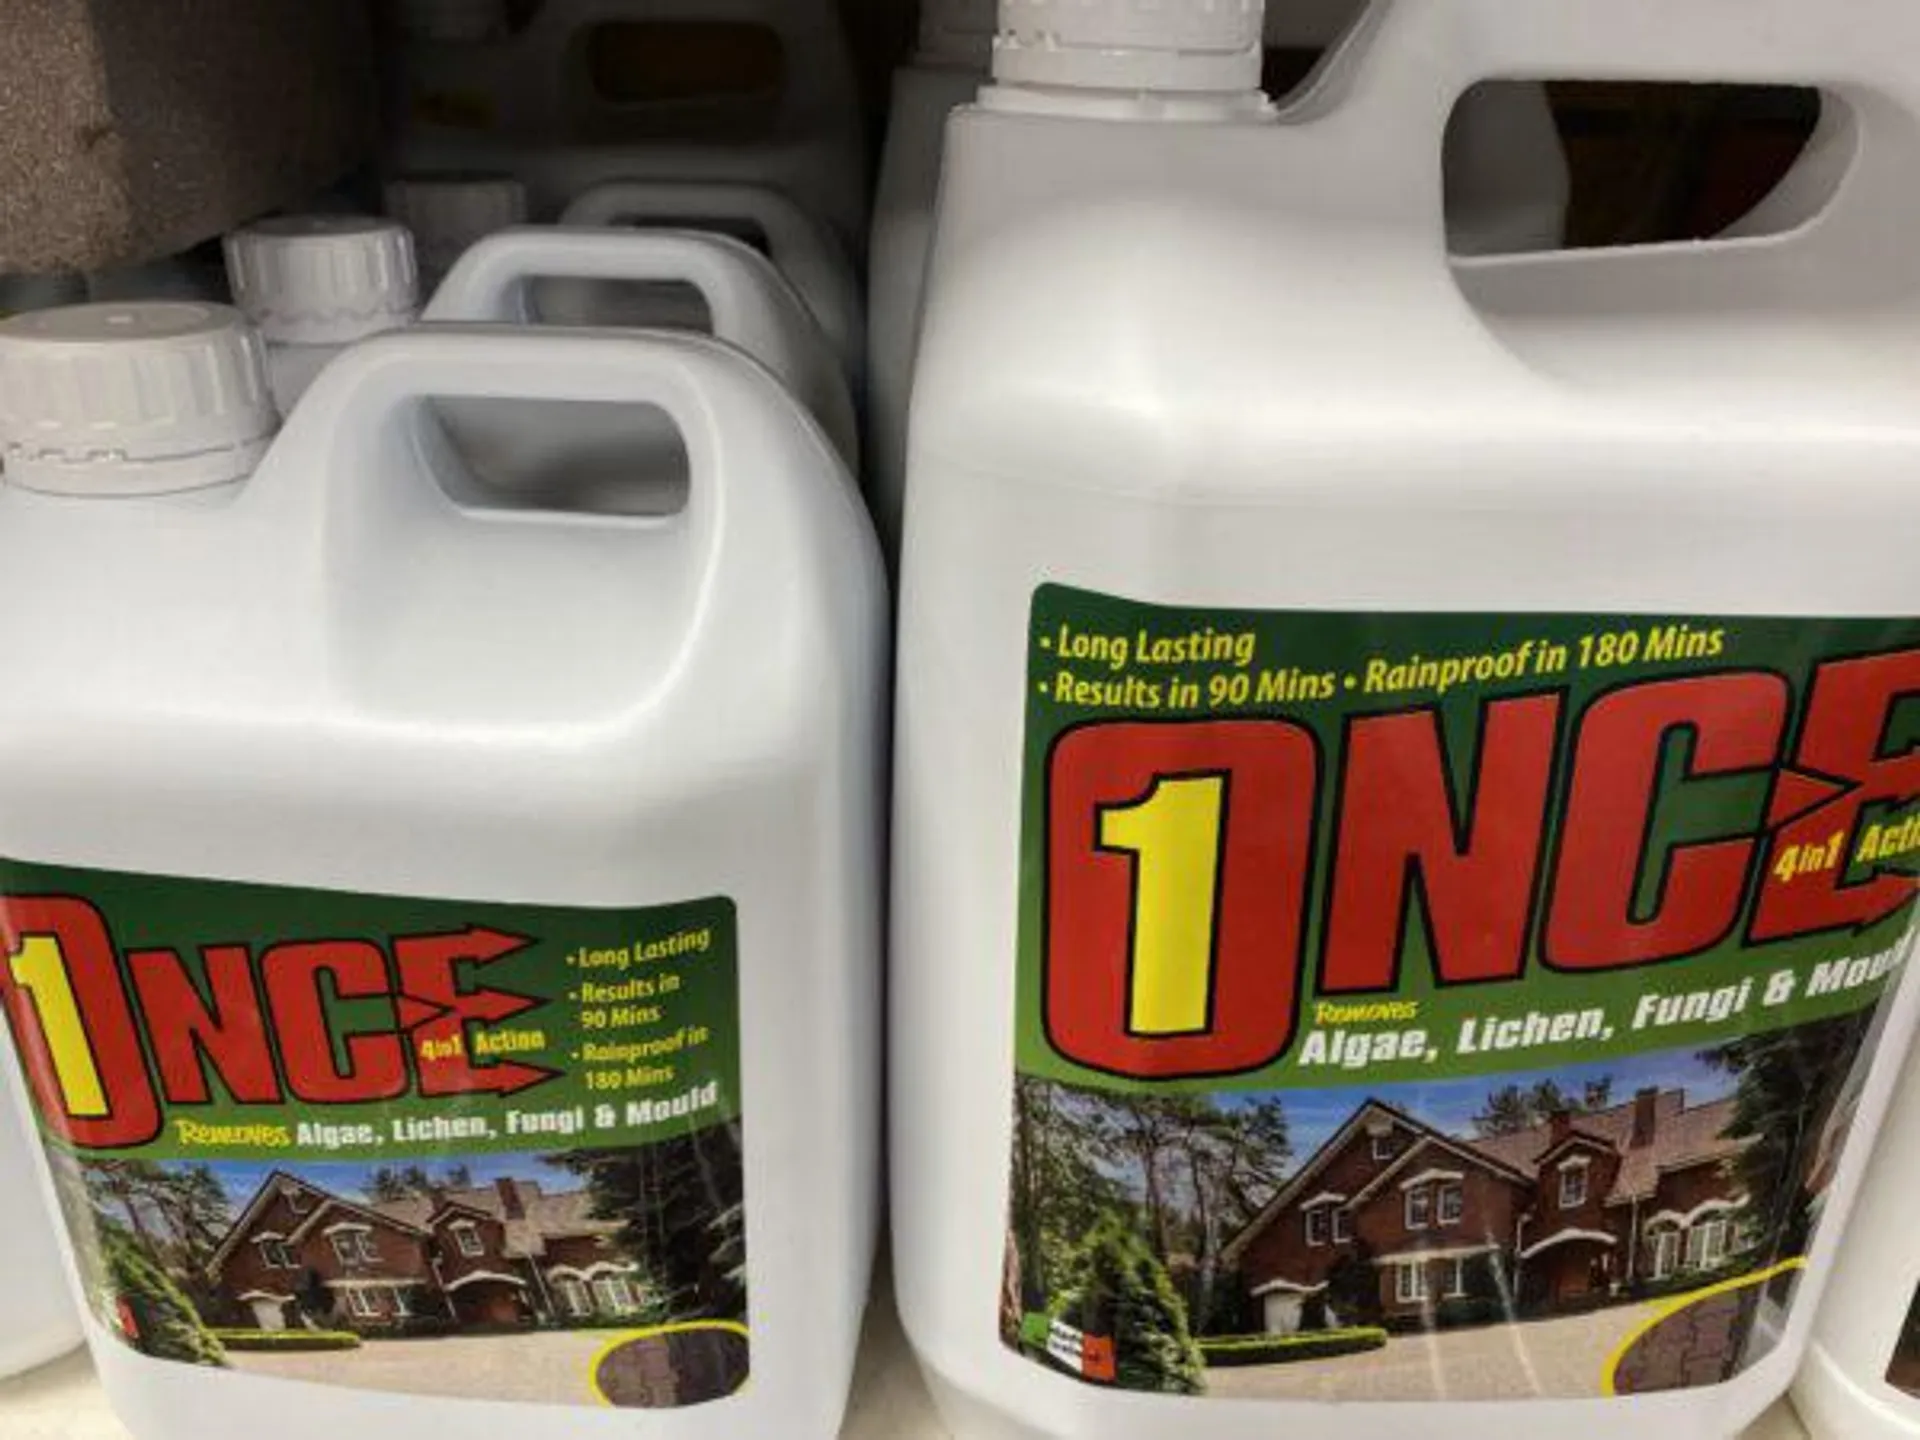 ONCE 4 IN 1 Action Moss Algae Lichen Fungi and Mould Remover